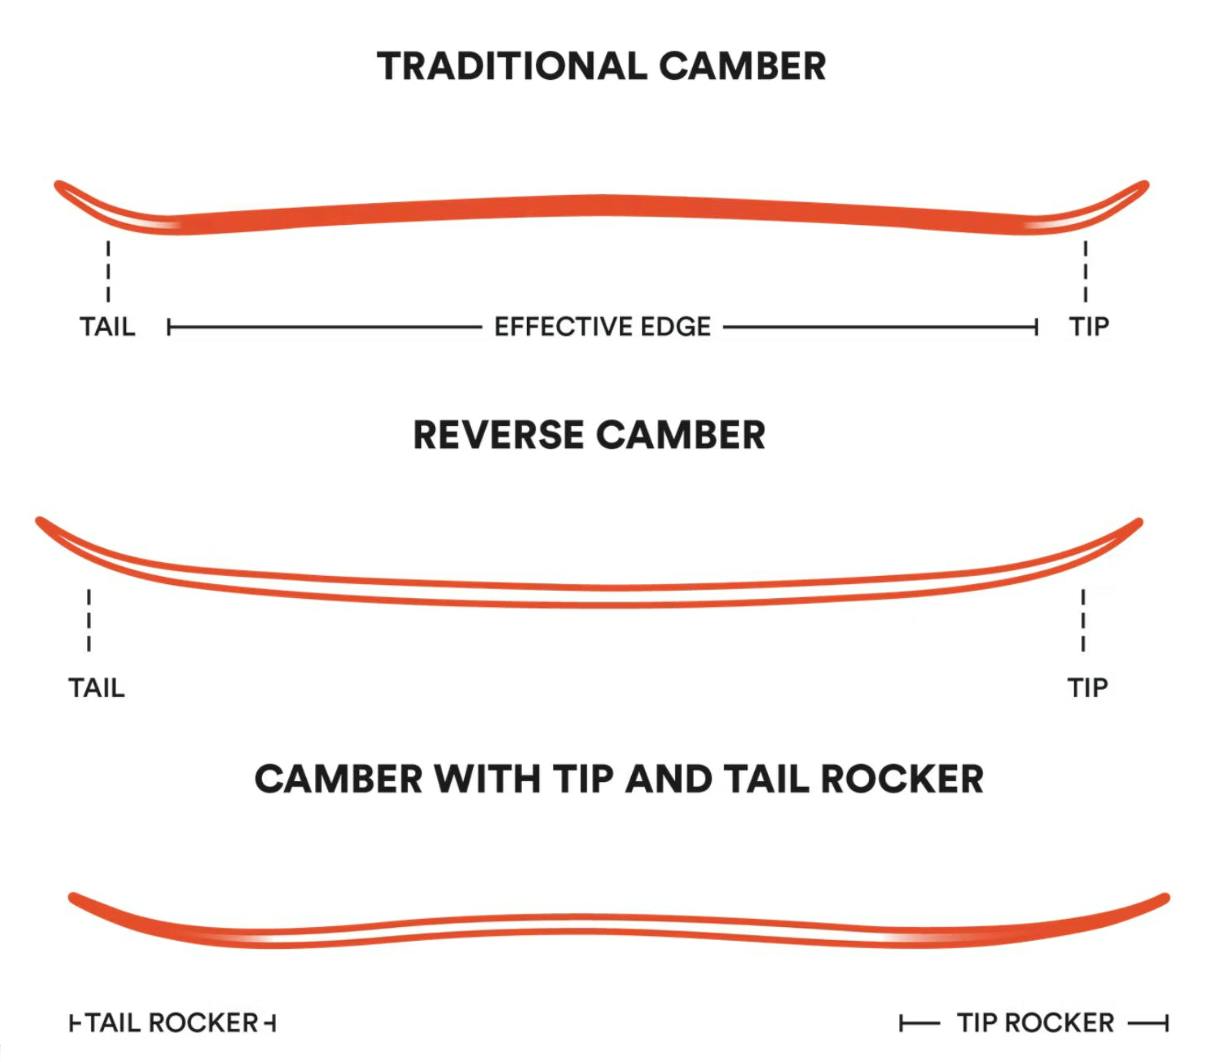 A ski profile diagram that breaks down traditional camber, reverse camber, and camber with tip and tail rocker.